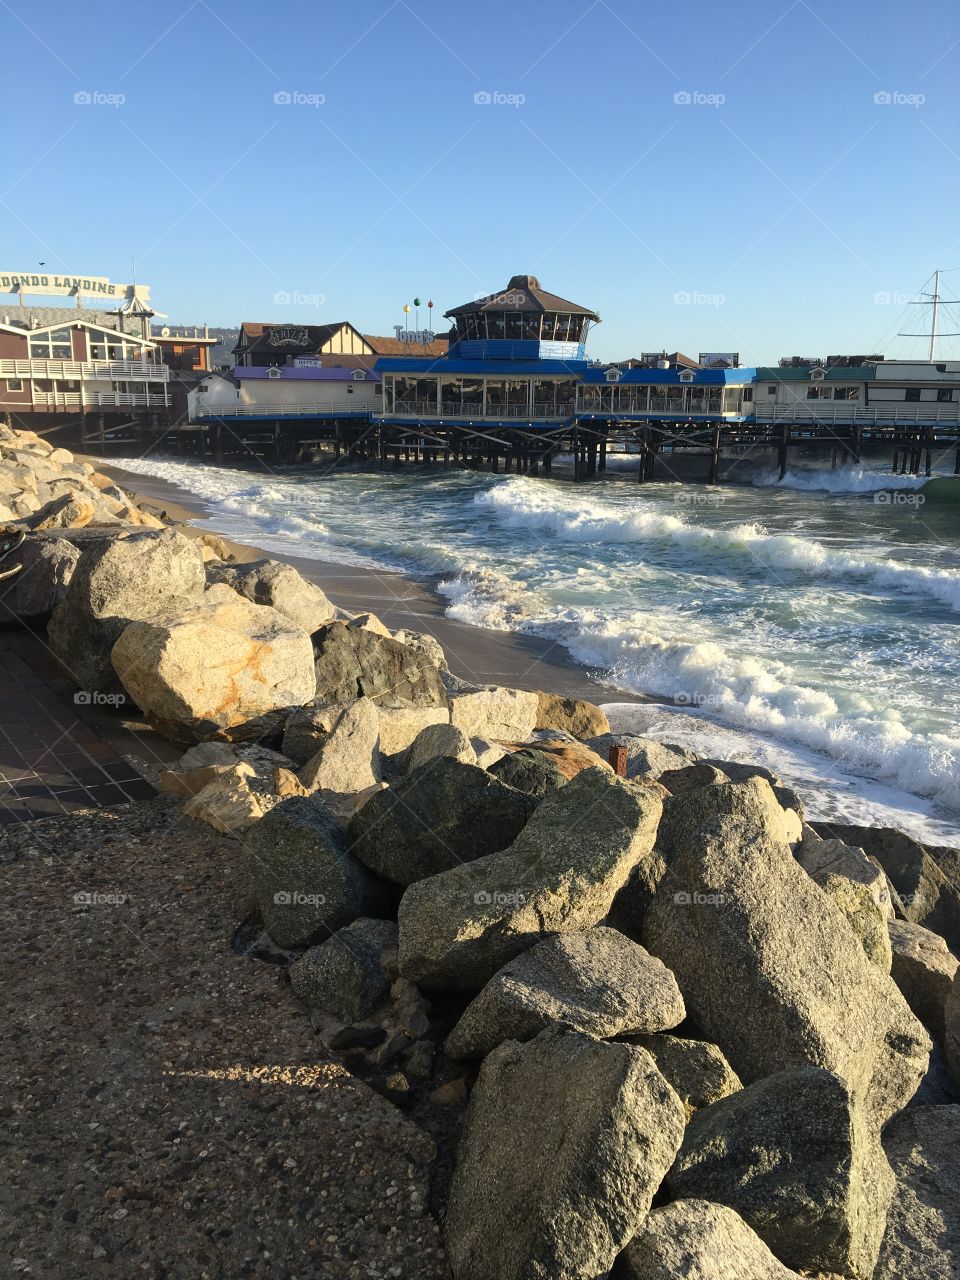 Seashore with a view of the Redondo Beach pier